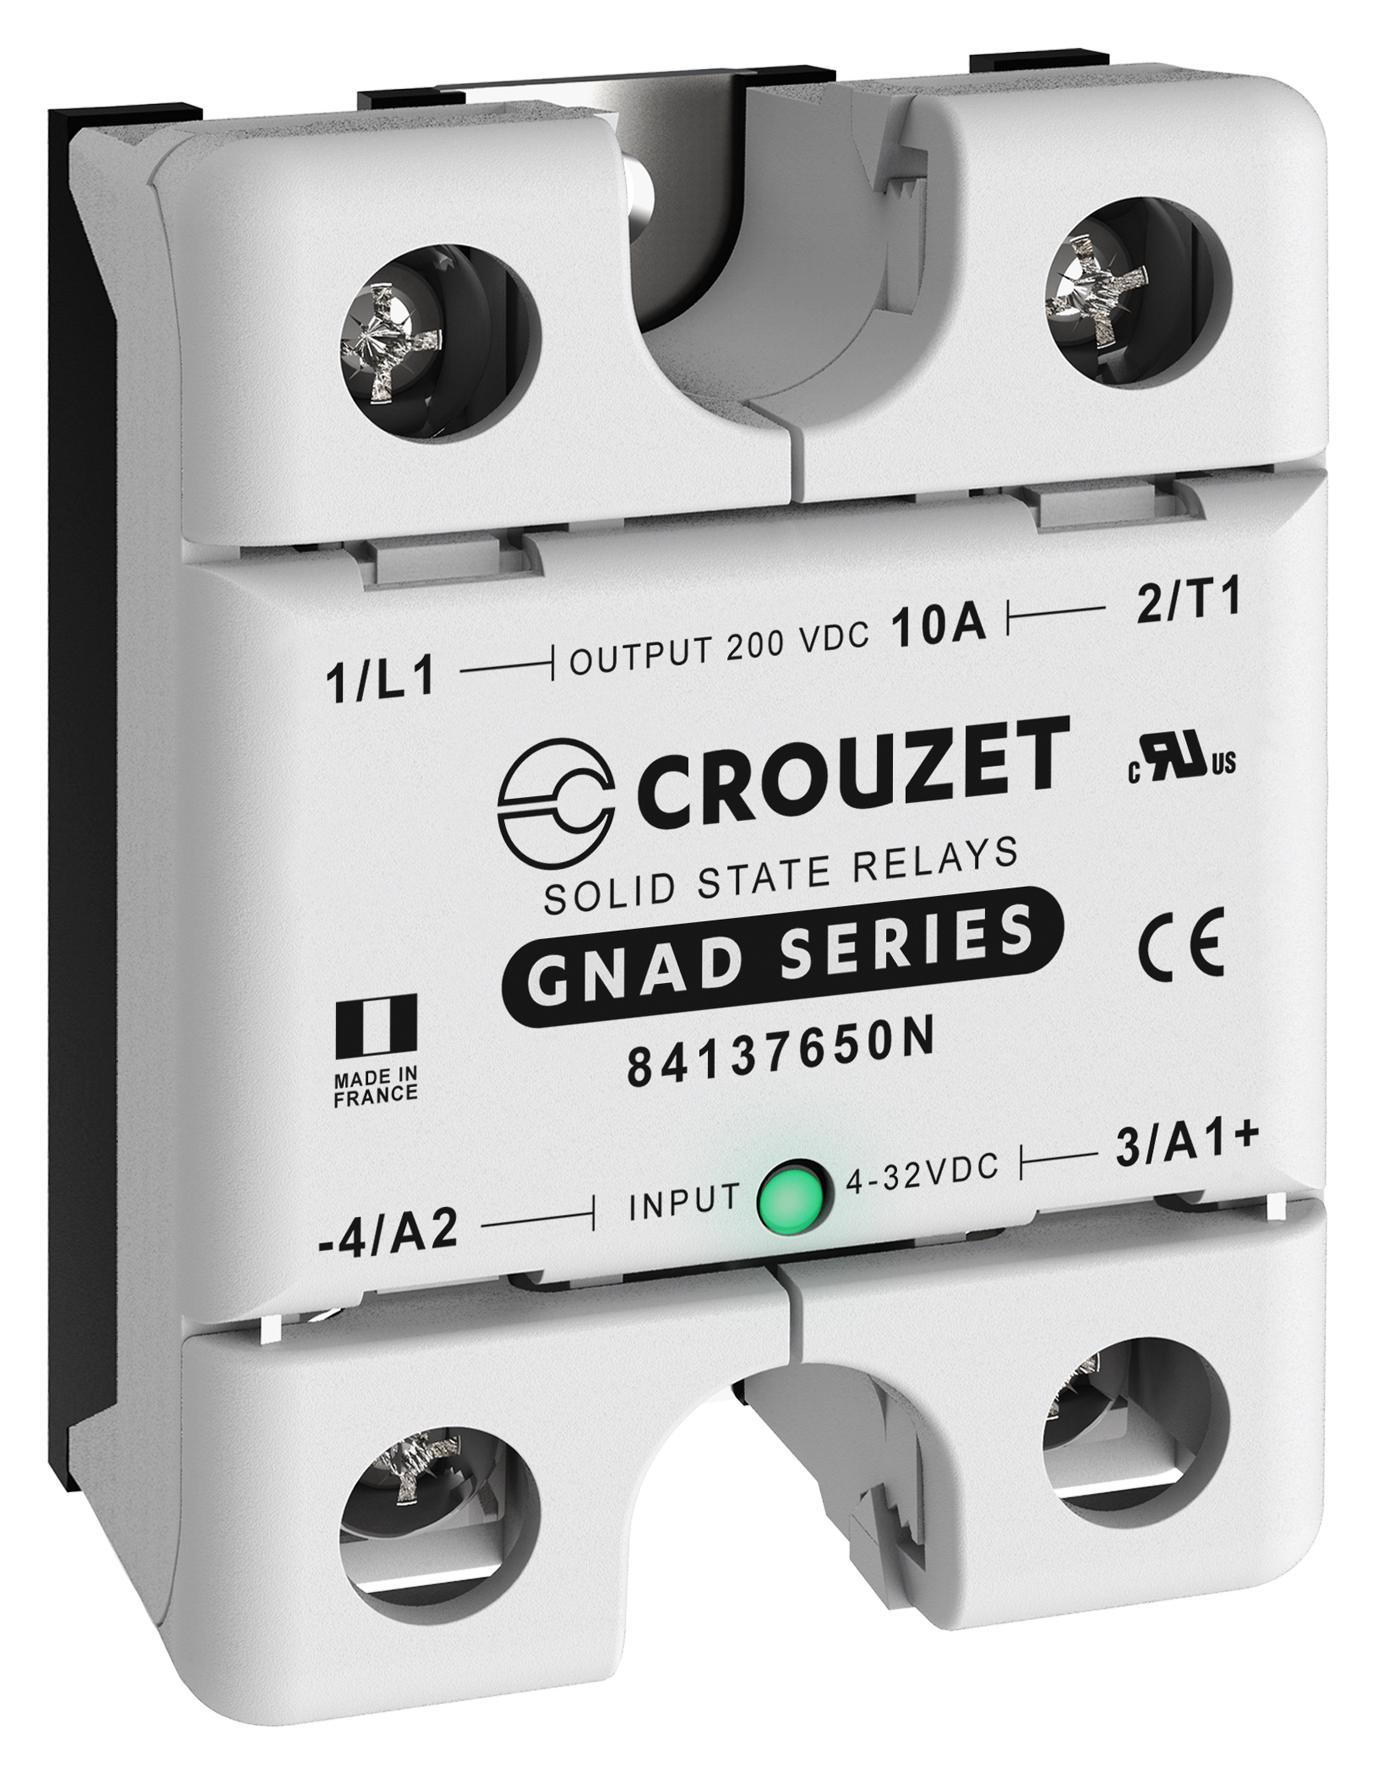 84137650N SOLID STATE RELAY, 10A, 5-200VDC, PANEL CROUZET